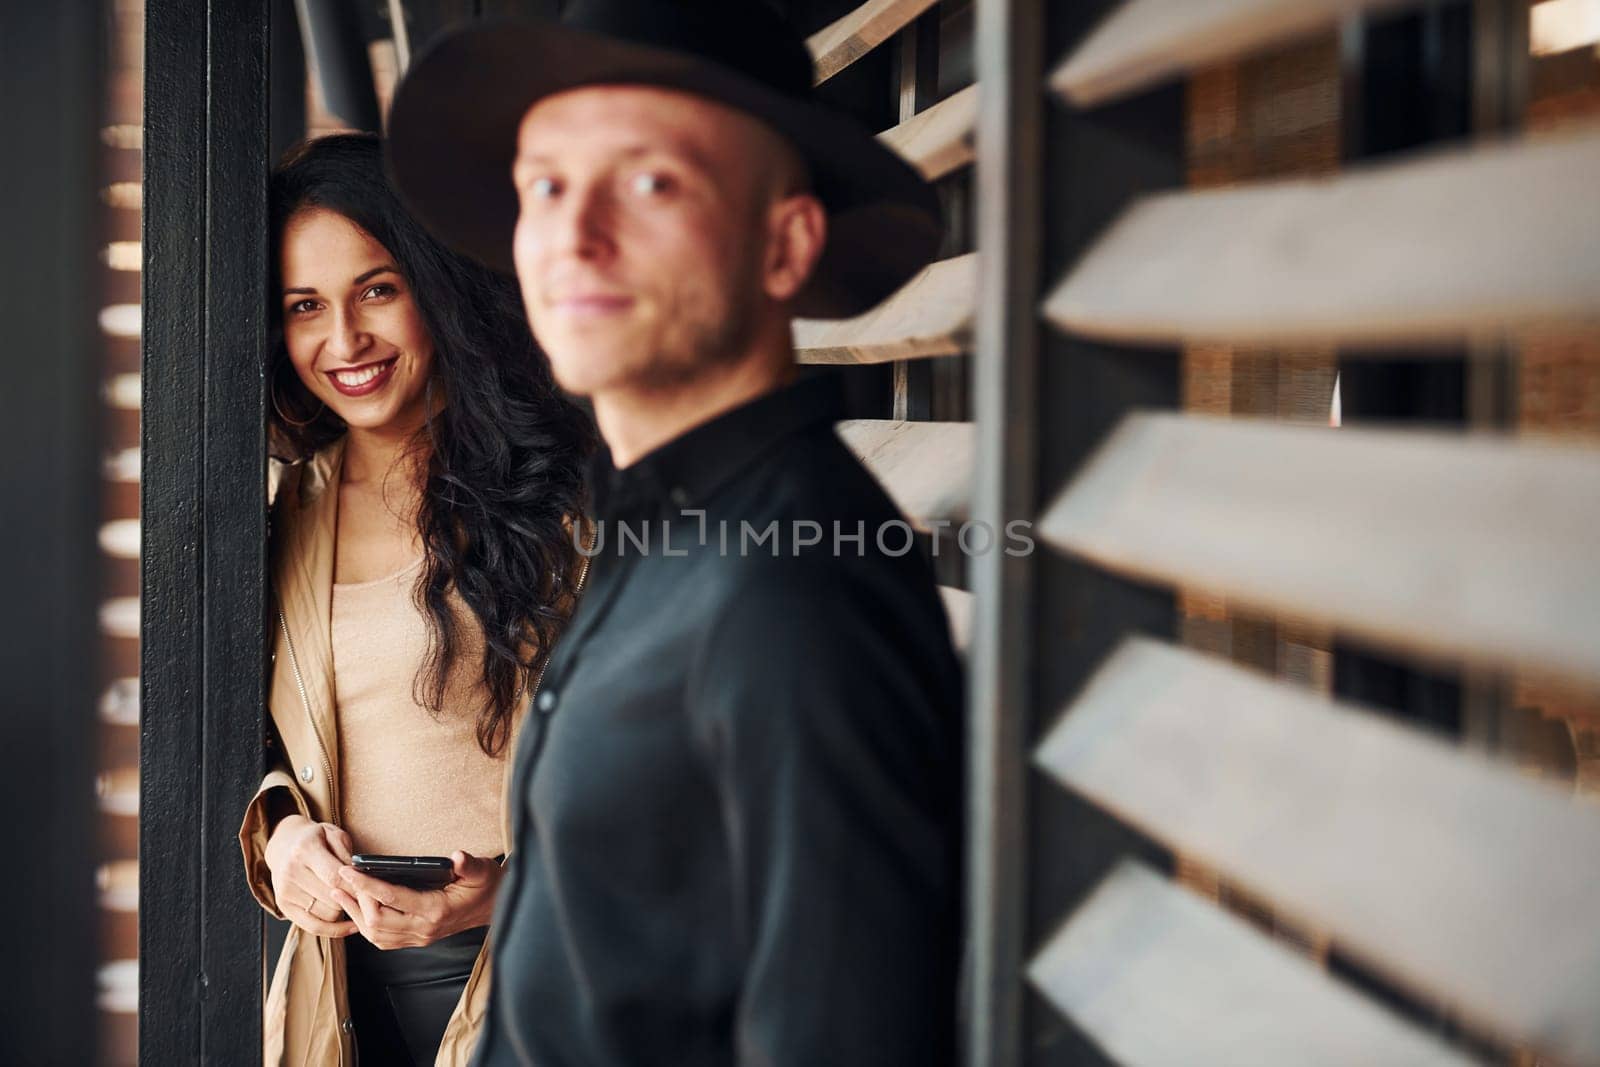 Woman with black curly hair and her man standing together near wooden windows by Standret